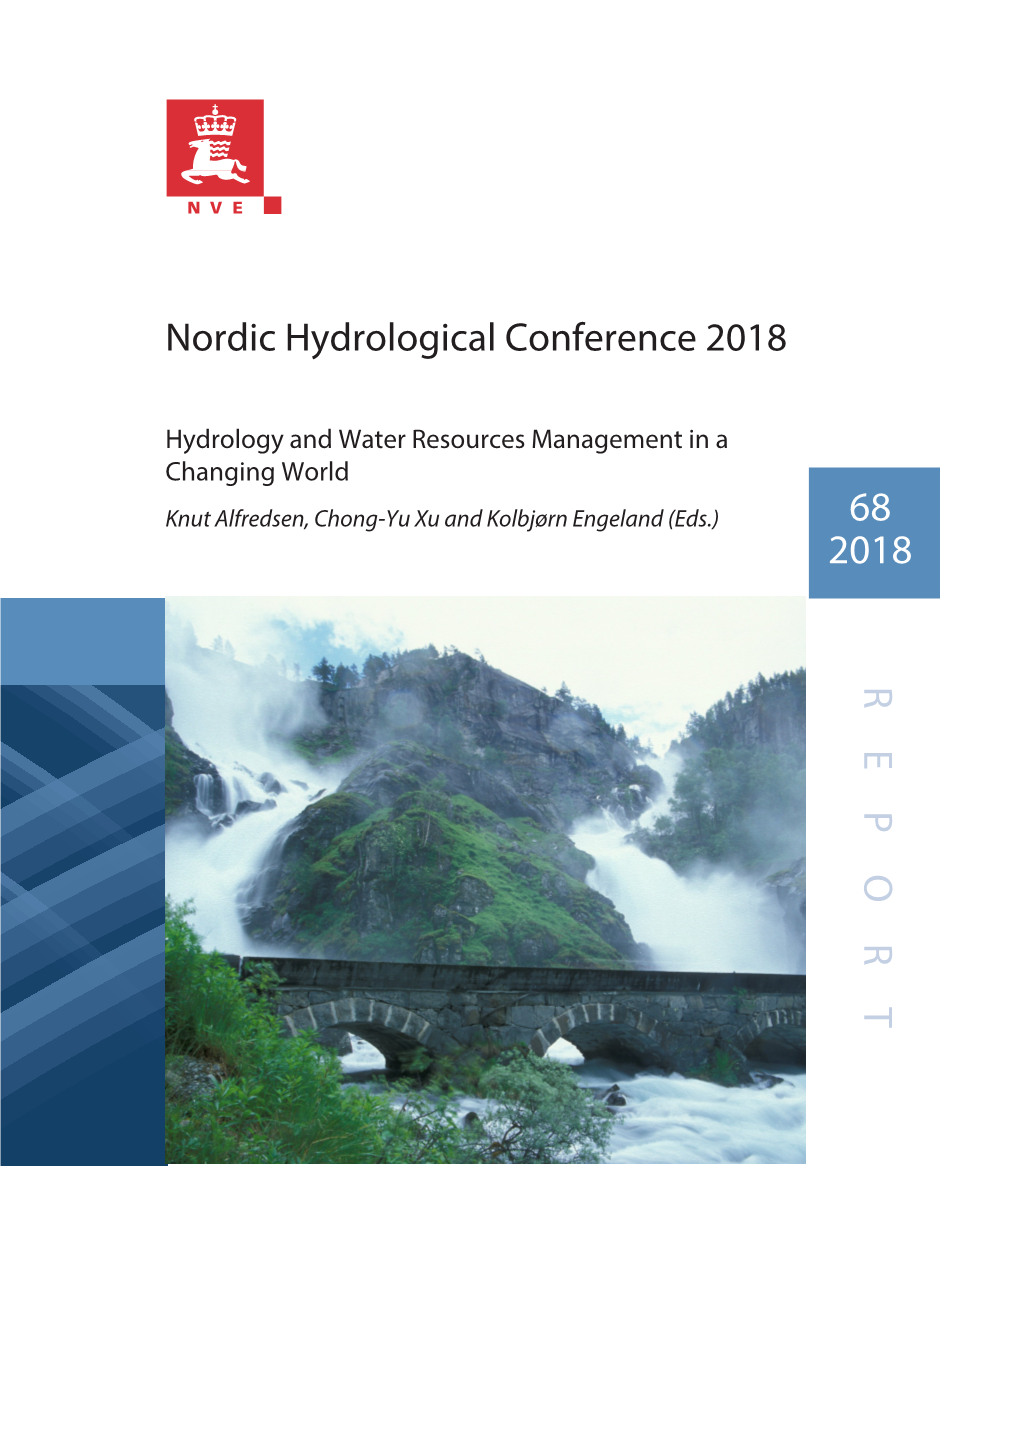 Nordic Hydrological Conference 2018 Conference Nordic Hydrological Nordic Hydrological Conference 2018